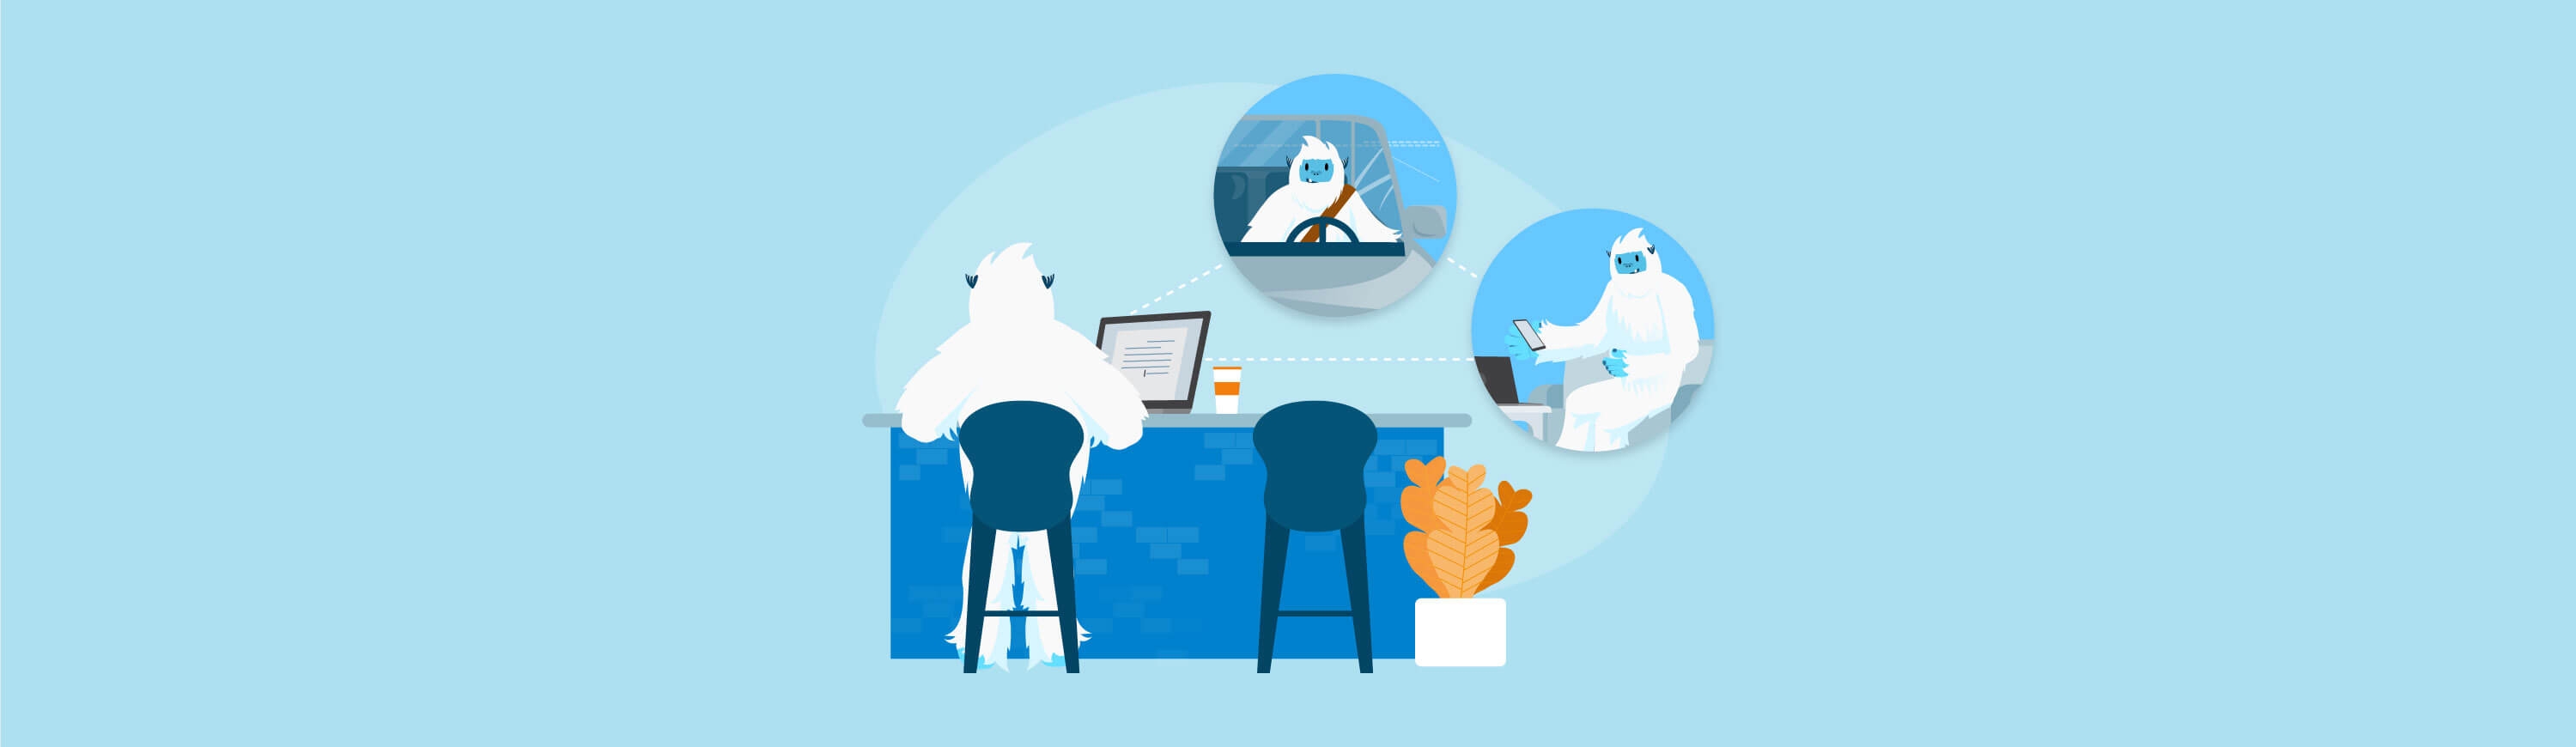 Illustration of Carl the yeti sitting at a desk on his computer. He is netowrking with other employees at his company.